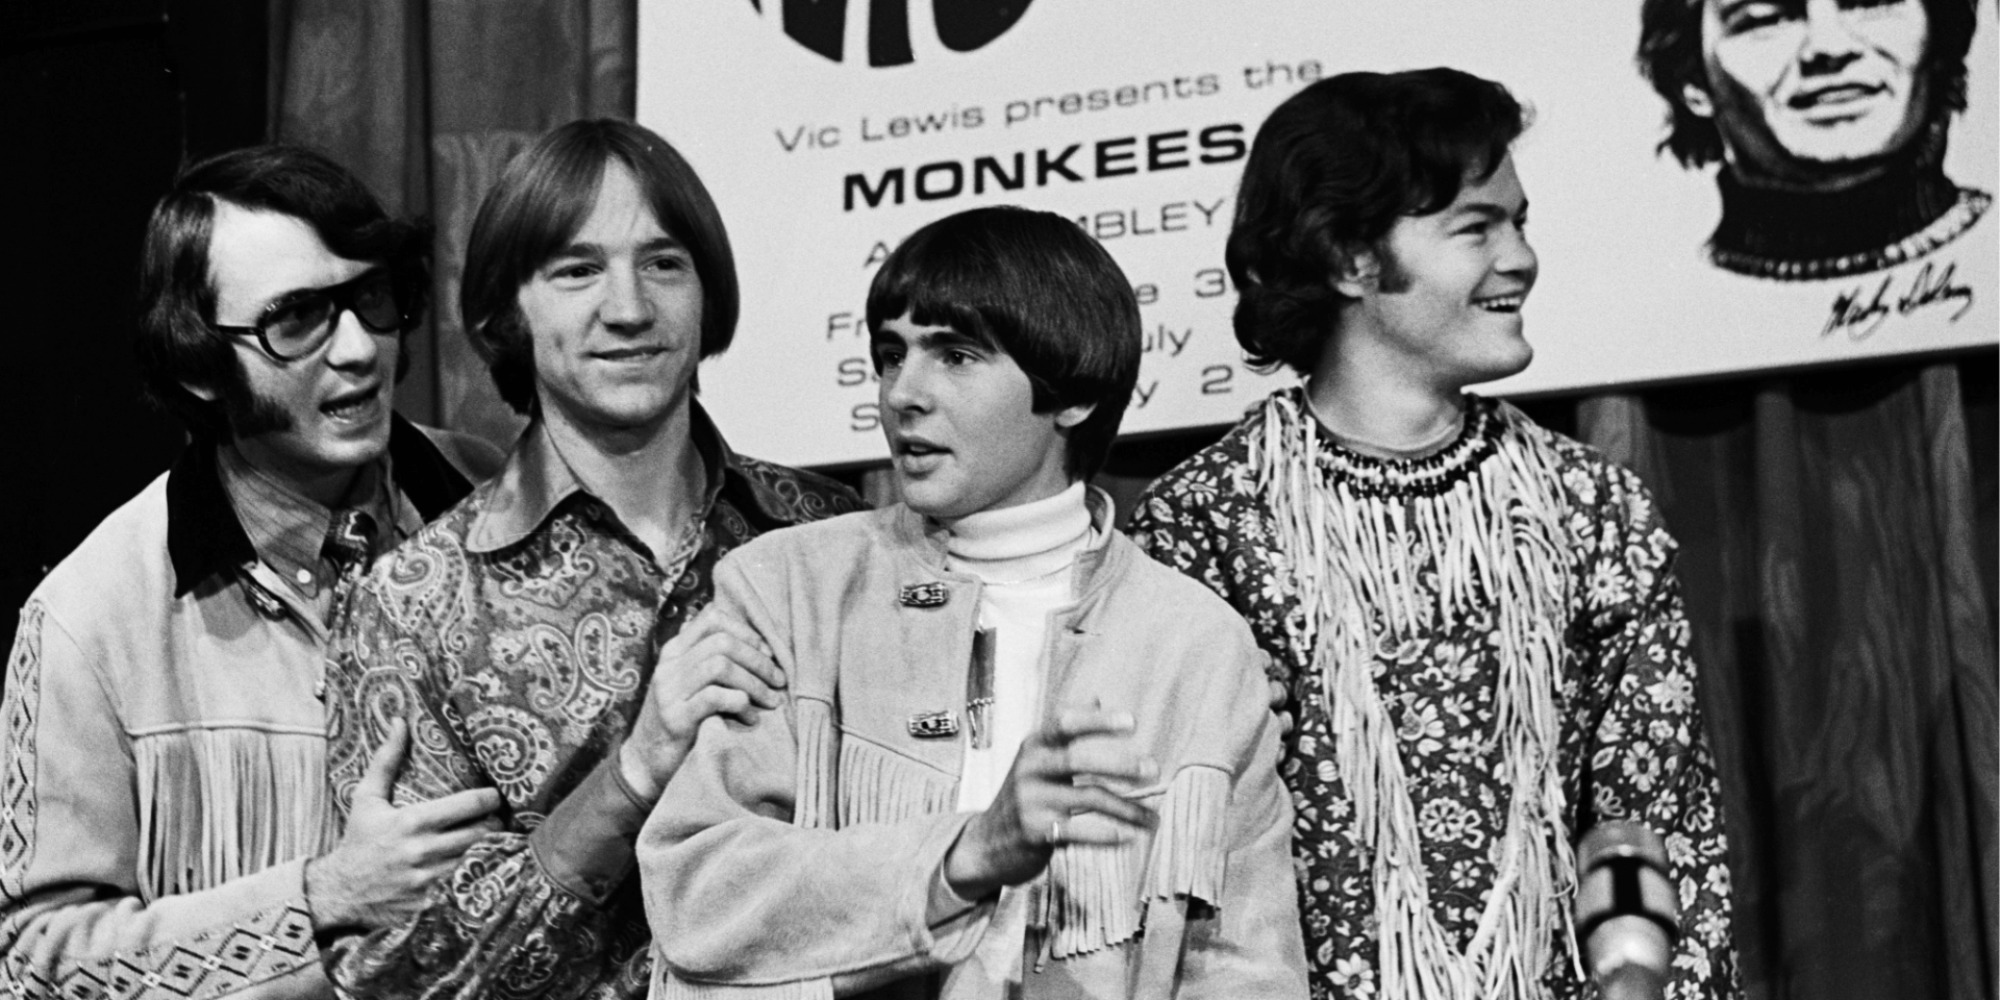 The Monkees: Mike Nesmith, Peter Tork, Davy Jones, and Micky Dolenz.